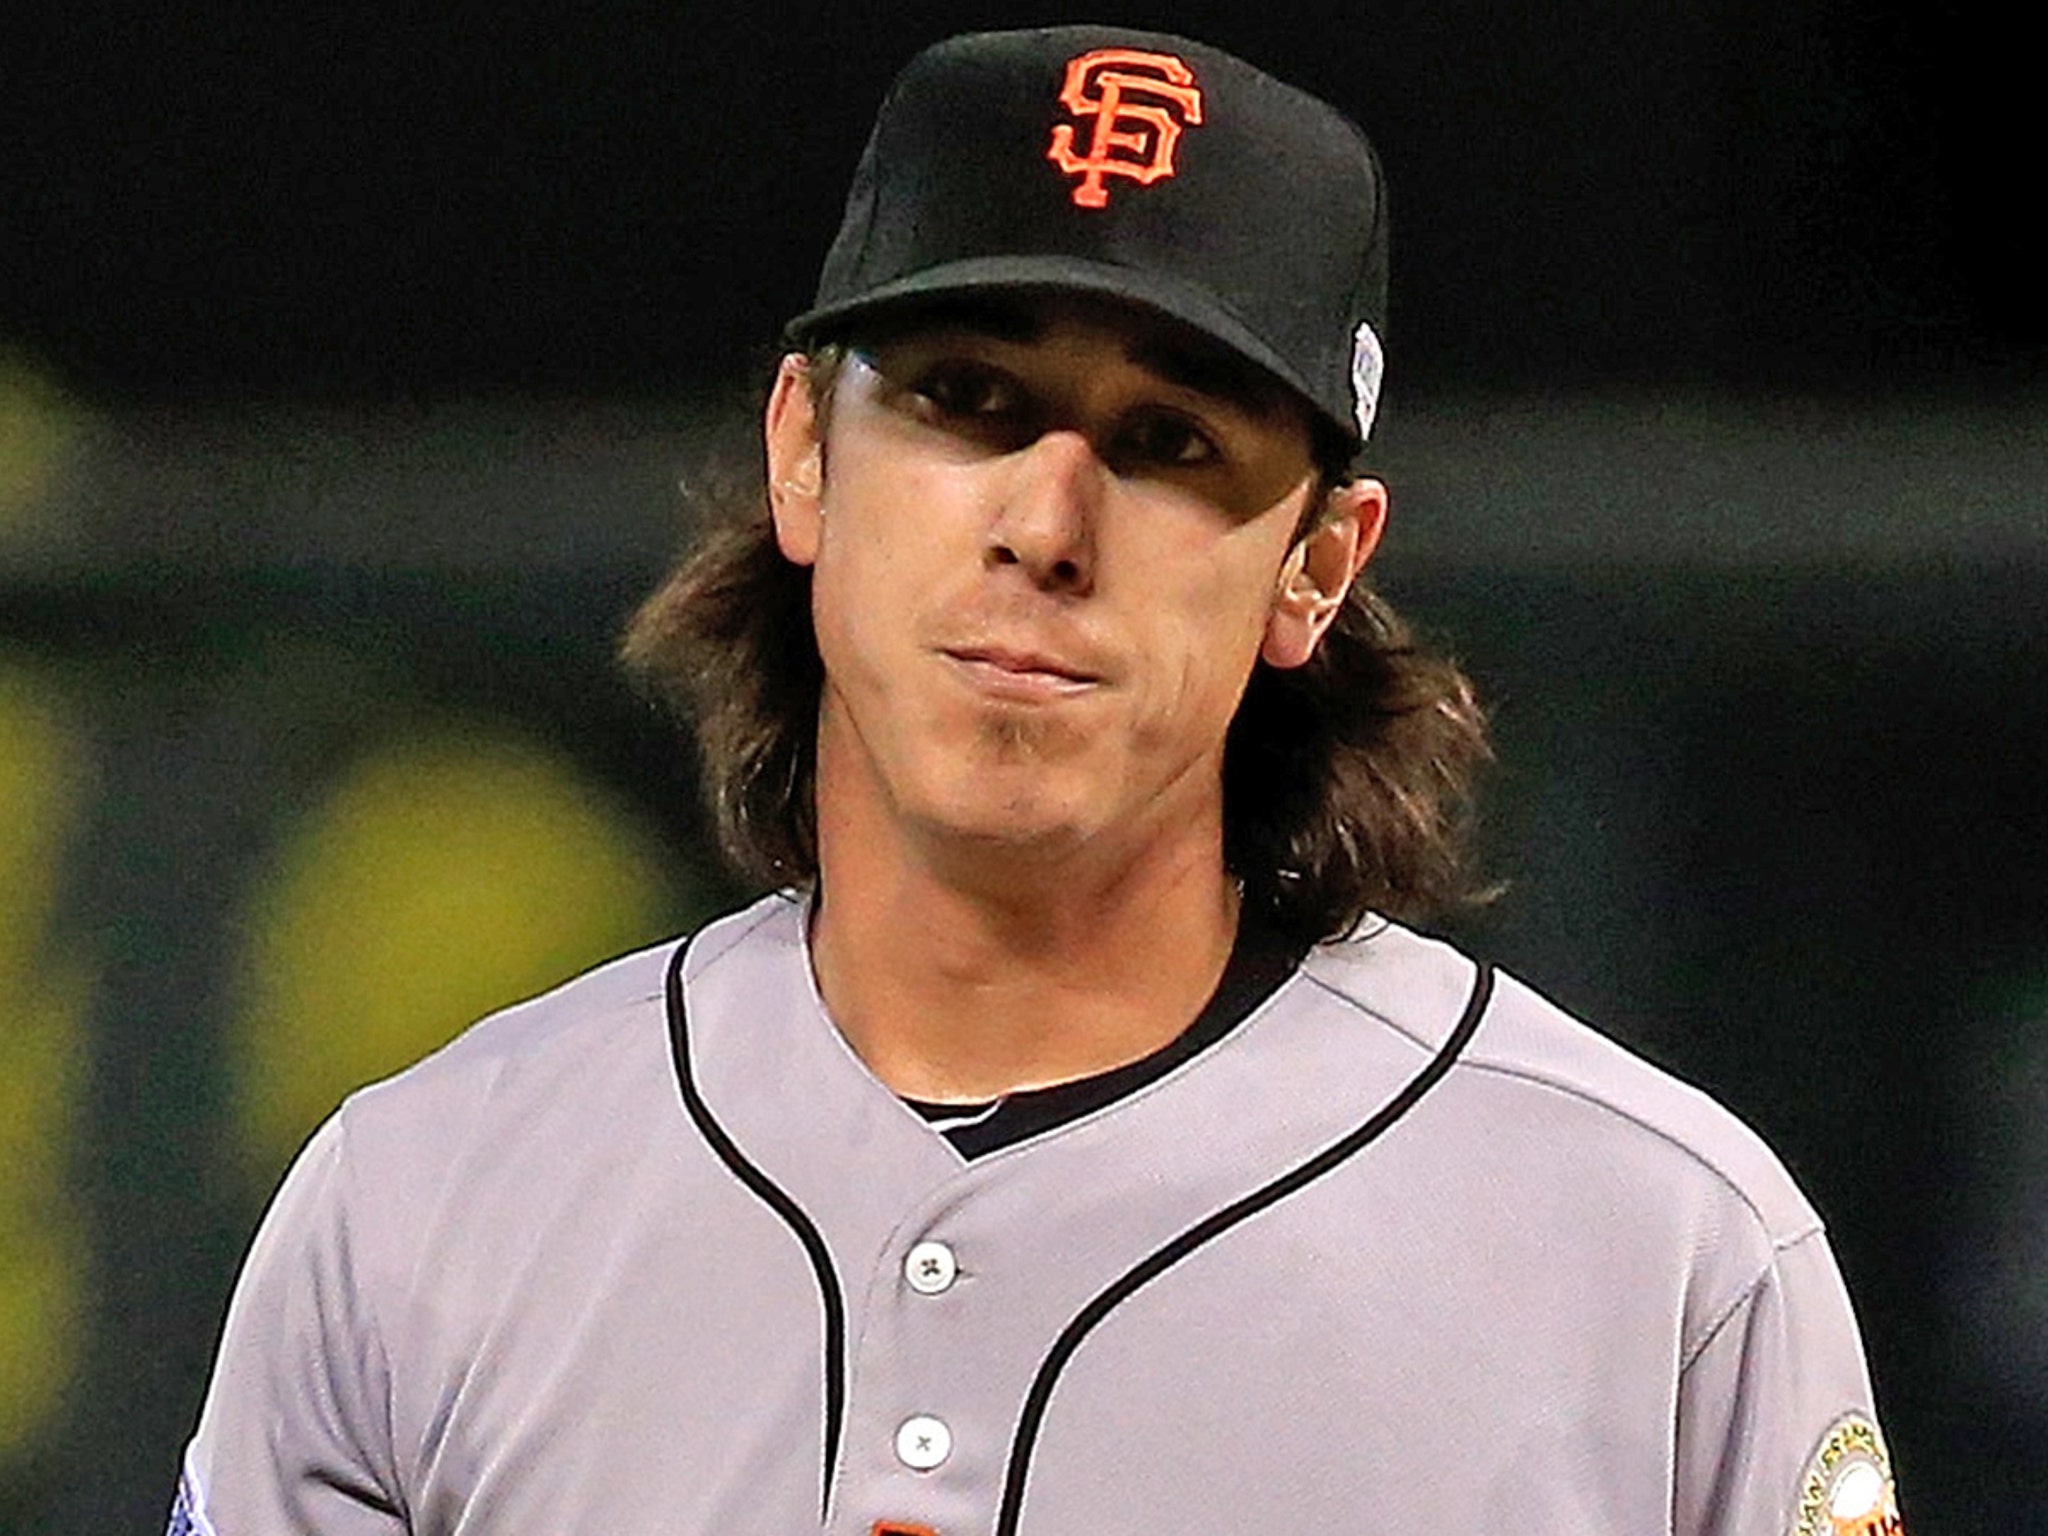 Giants announce Cristin Coleman, Tim Lincecum's wife, has passed